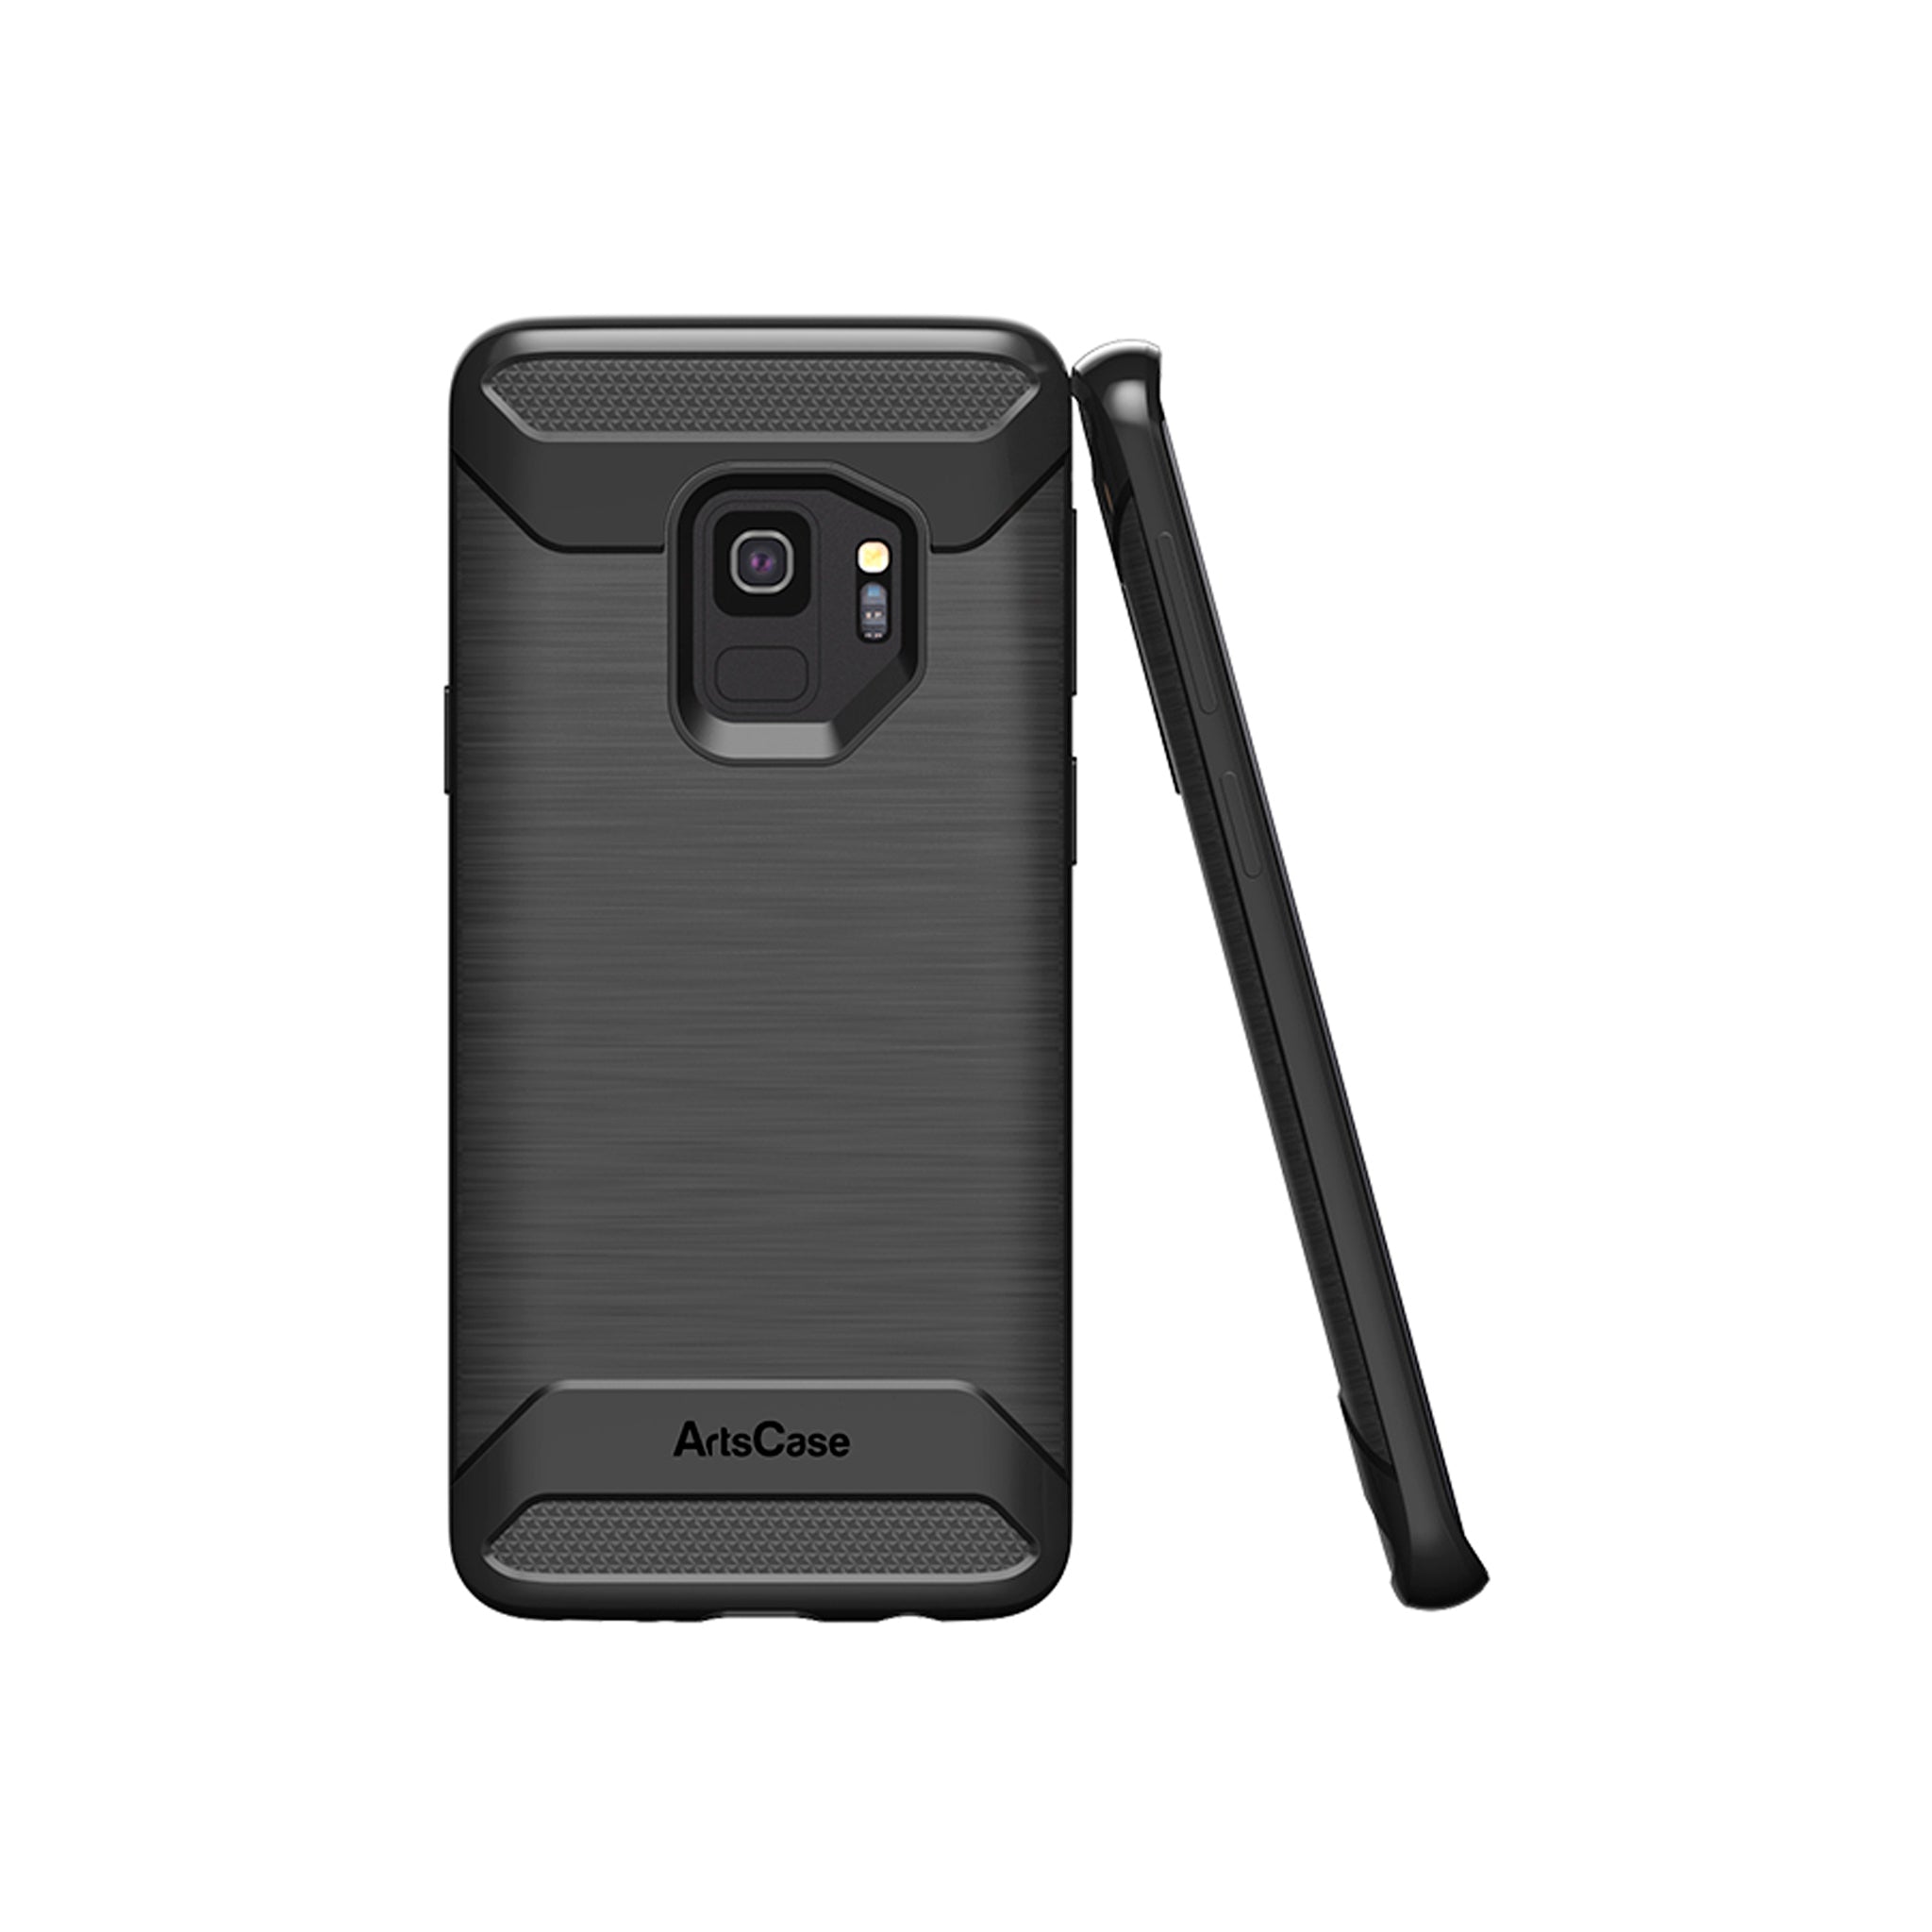 ArtsCase - Rugged Impact Series for Galaxy S9 - Black